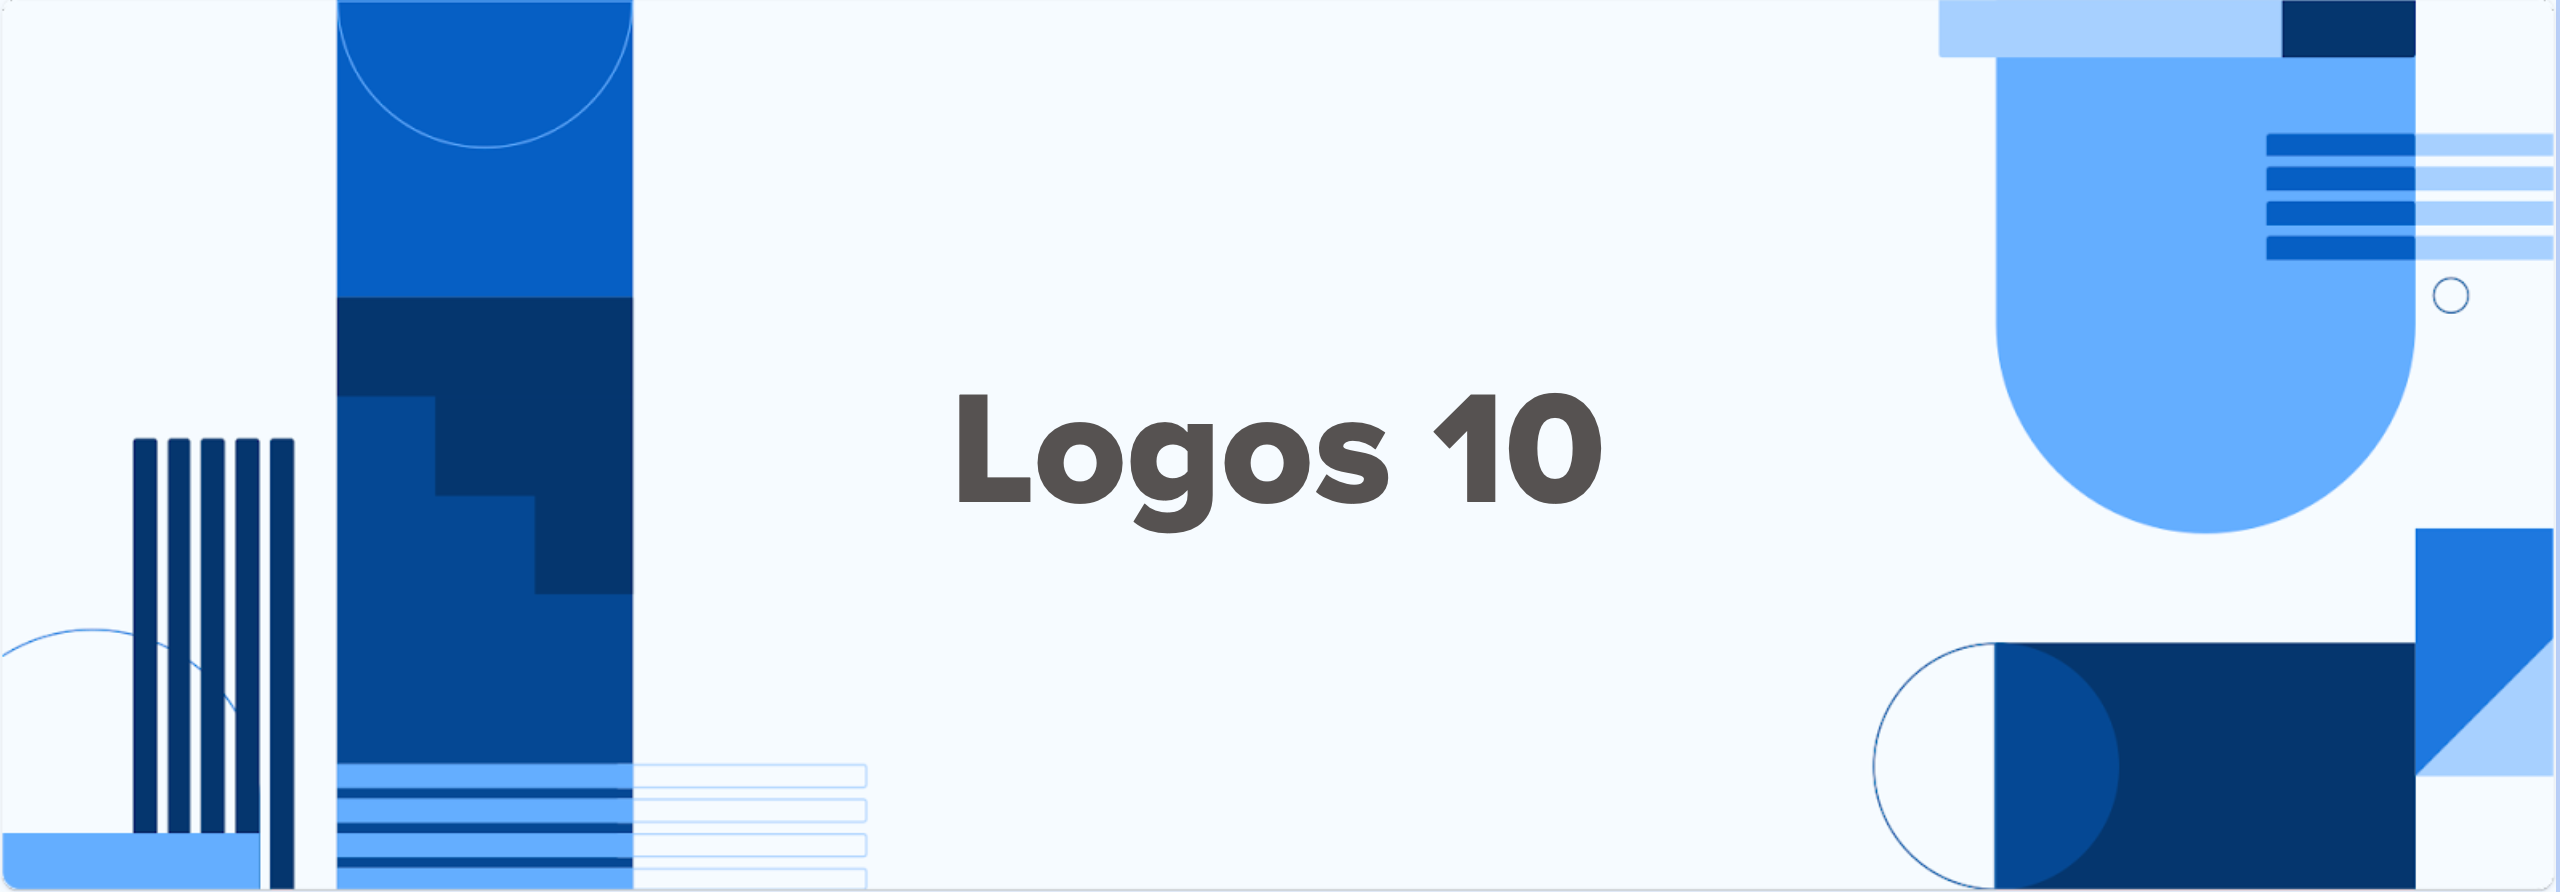 Logos 10 Review: Is It Worth it?